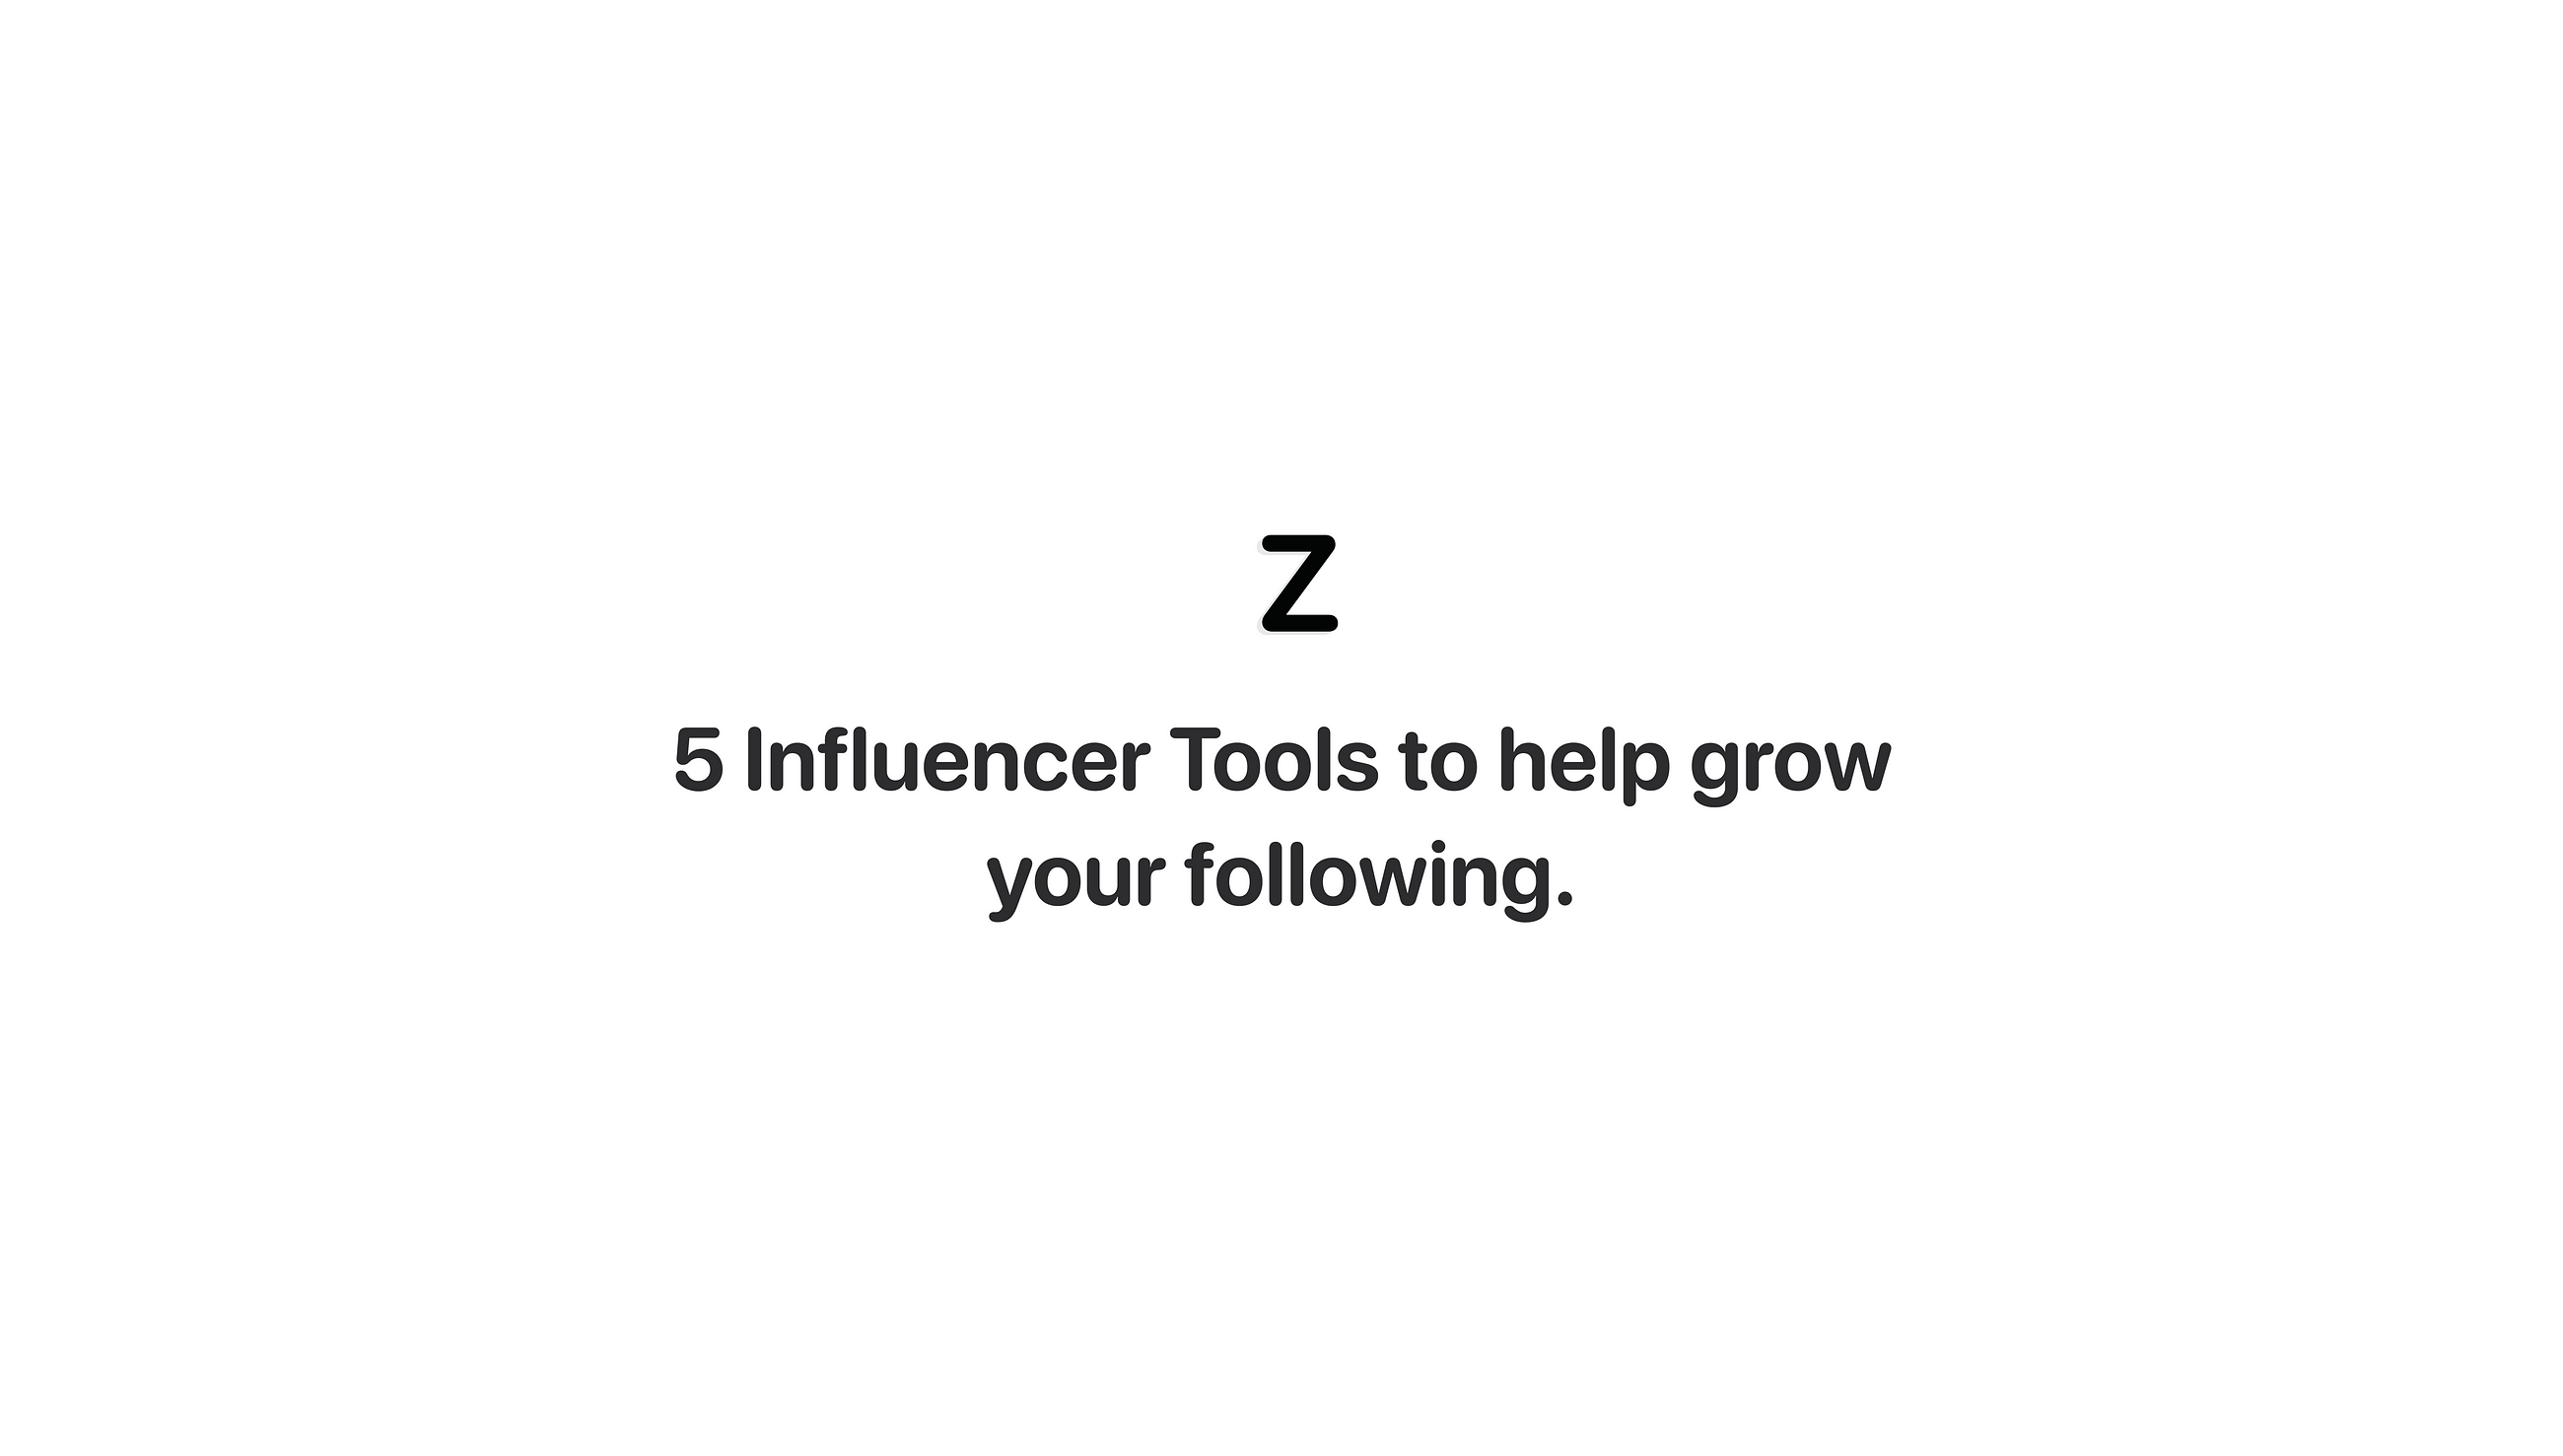 5 Influencer Tools to help grow your following.